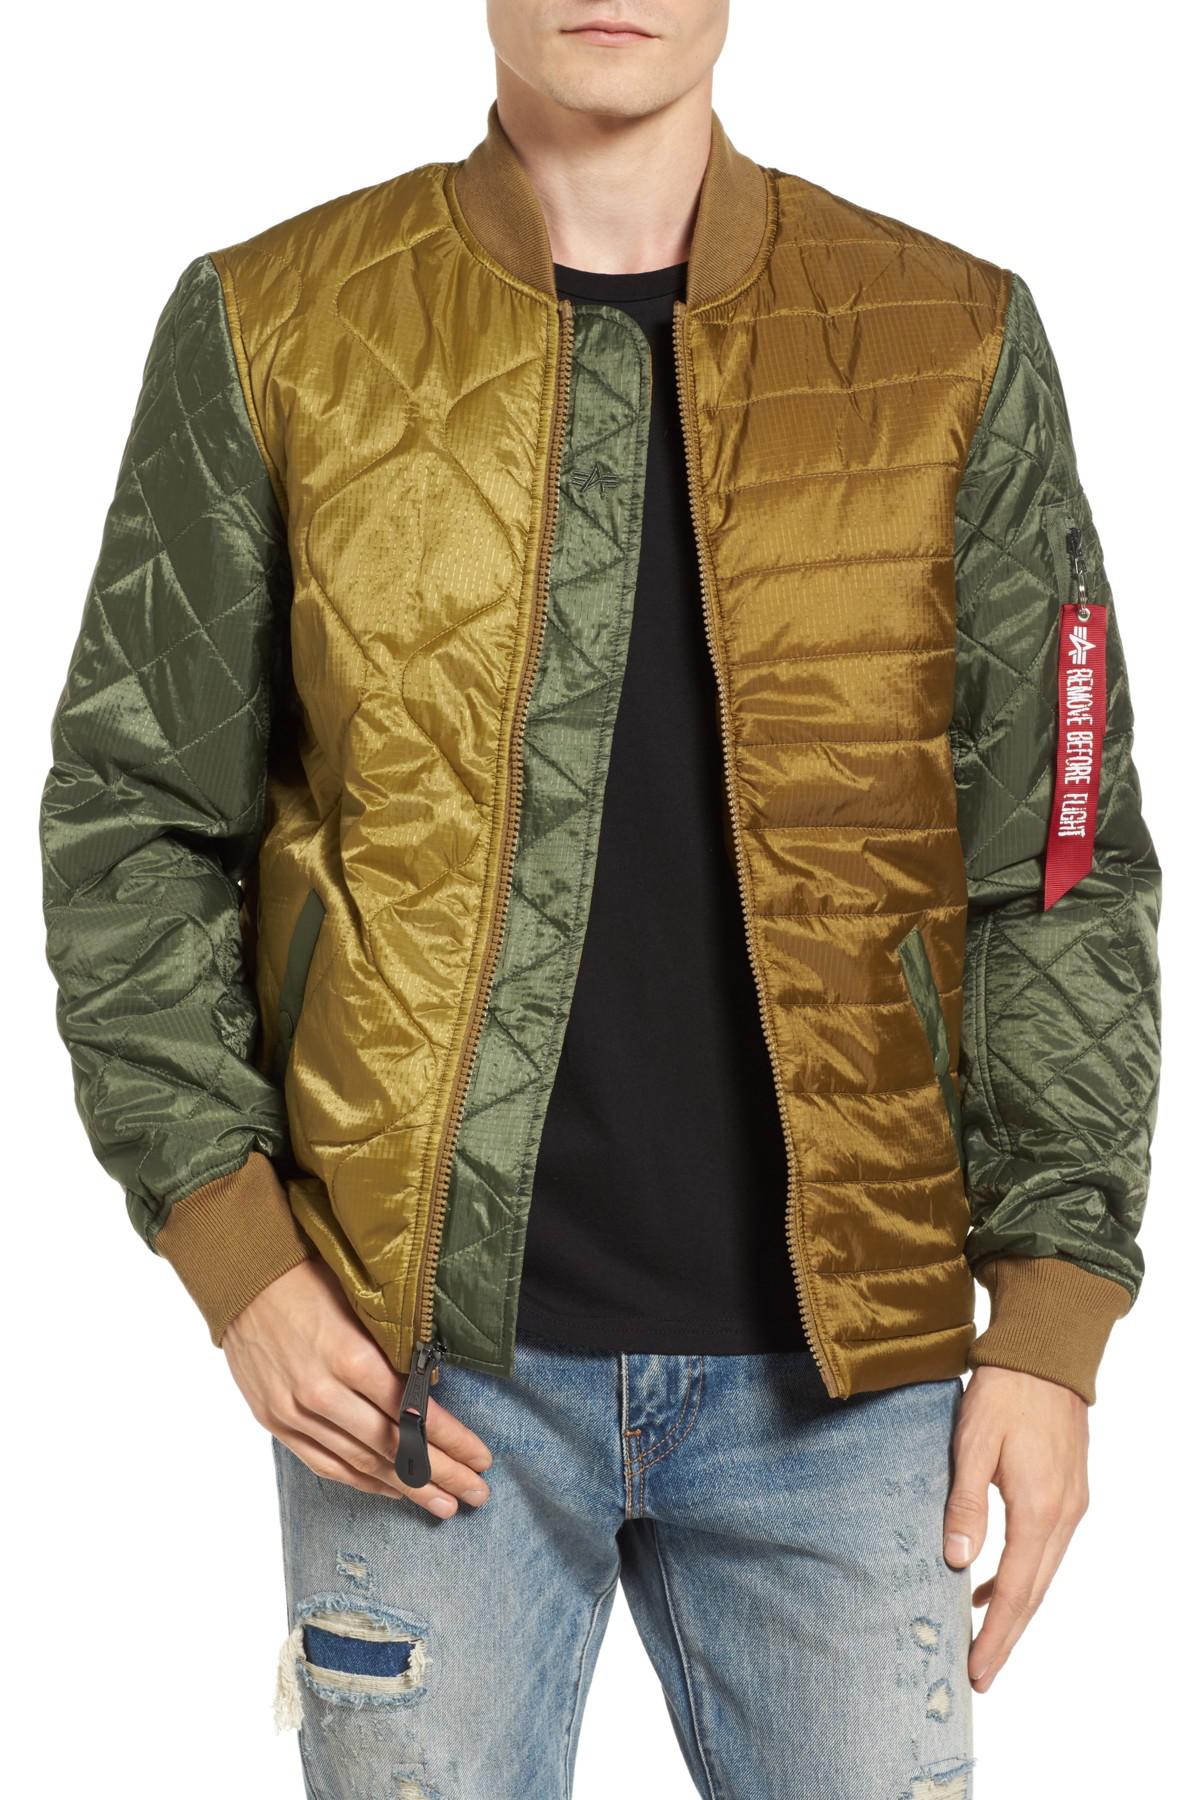 Alpha Industries Ally Bomber Jacket in Green for Men - Lyst